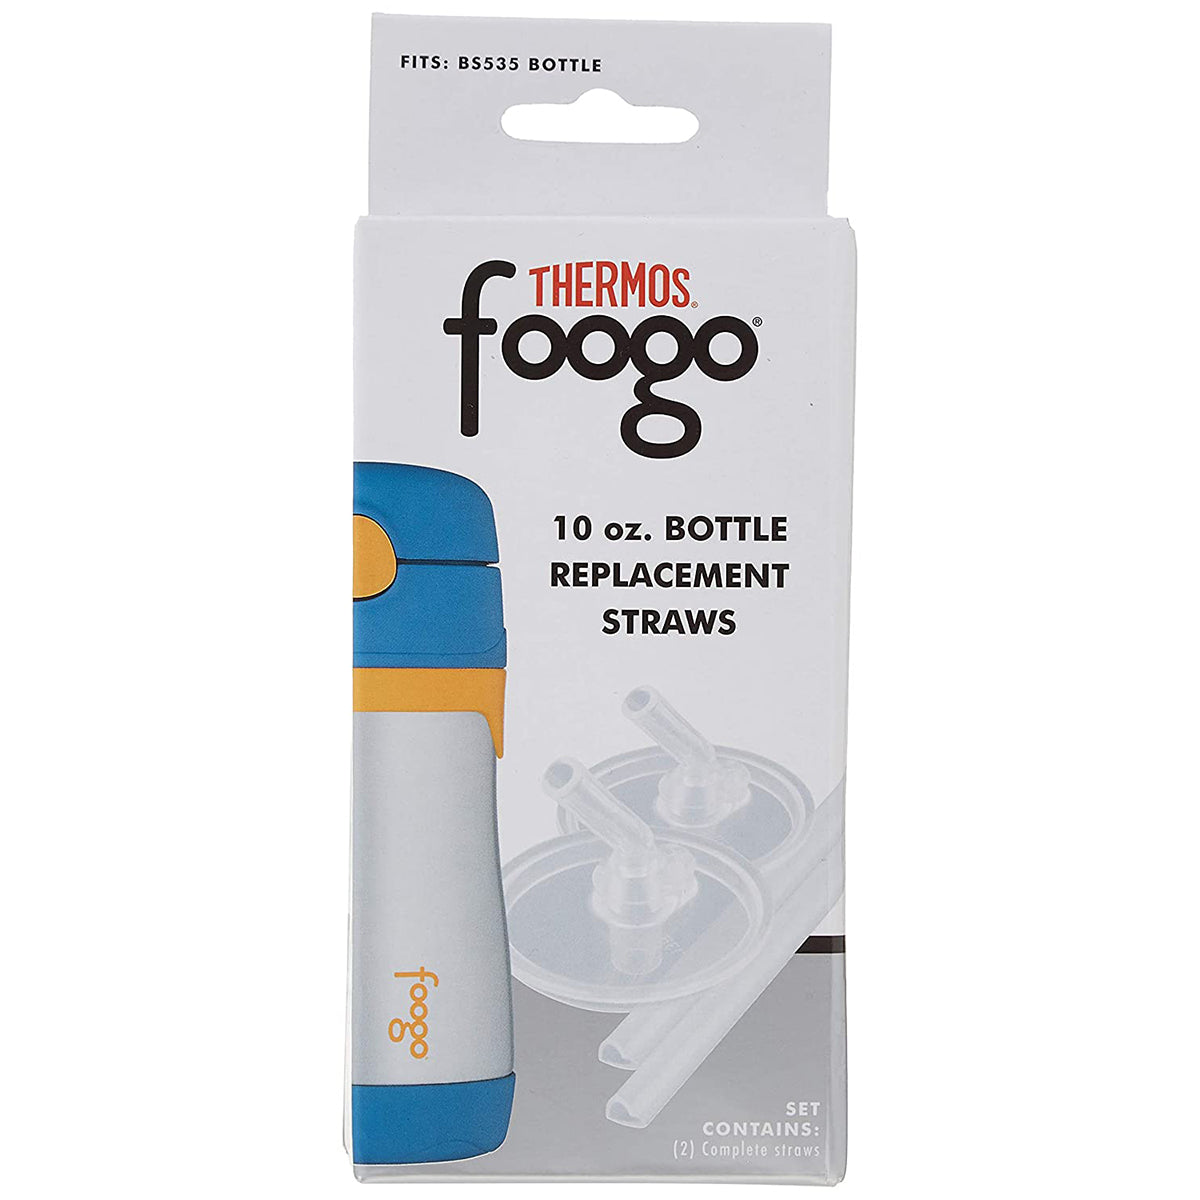 Thermos Foogo 10 oz. Bottle Replacement Straw Set 2-Pack - Clear Thermos